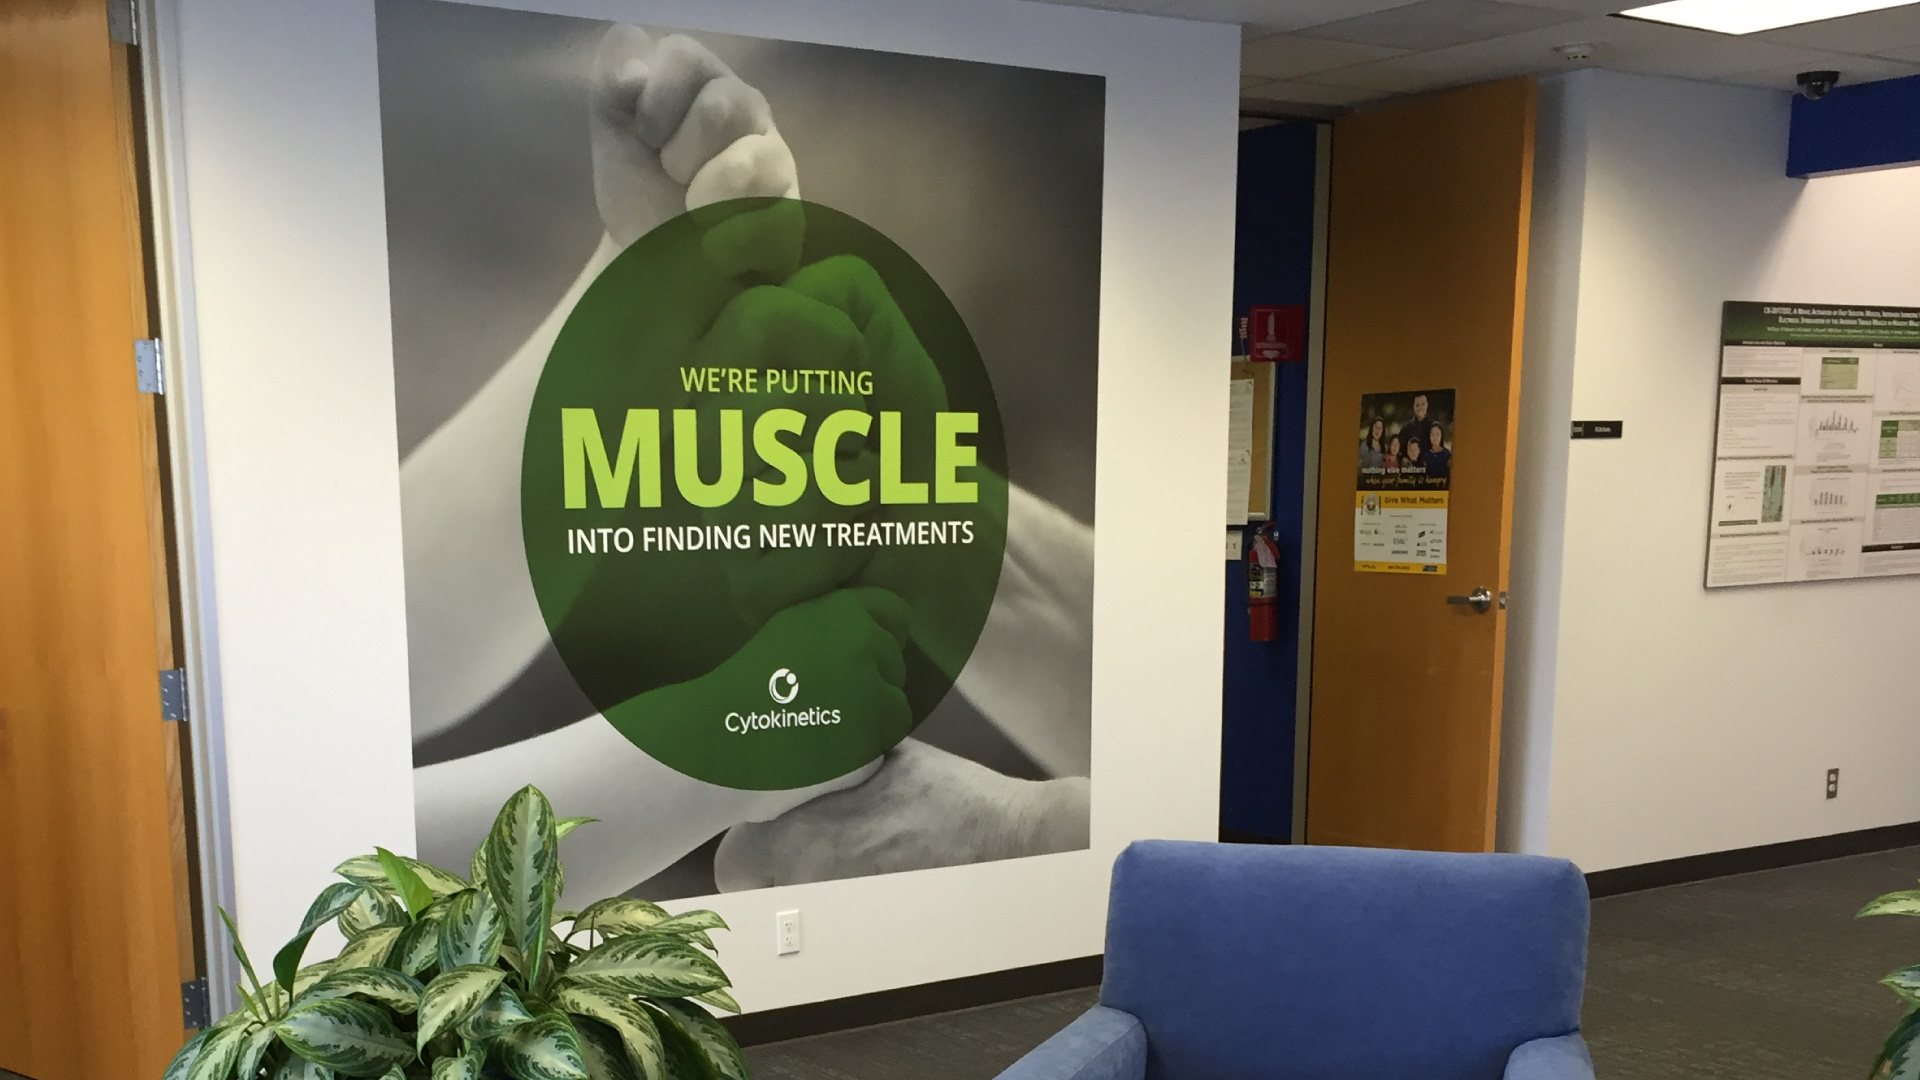 Photograph showing mural installed in an office hallway with the phrase "We're putting muscle into finding new treatments."